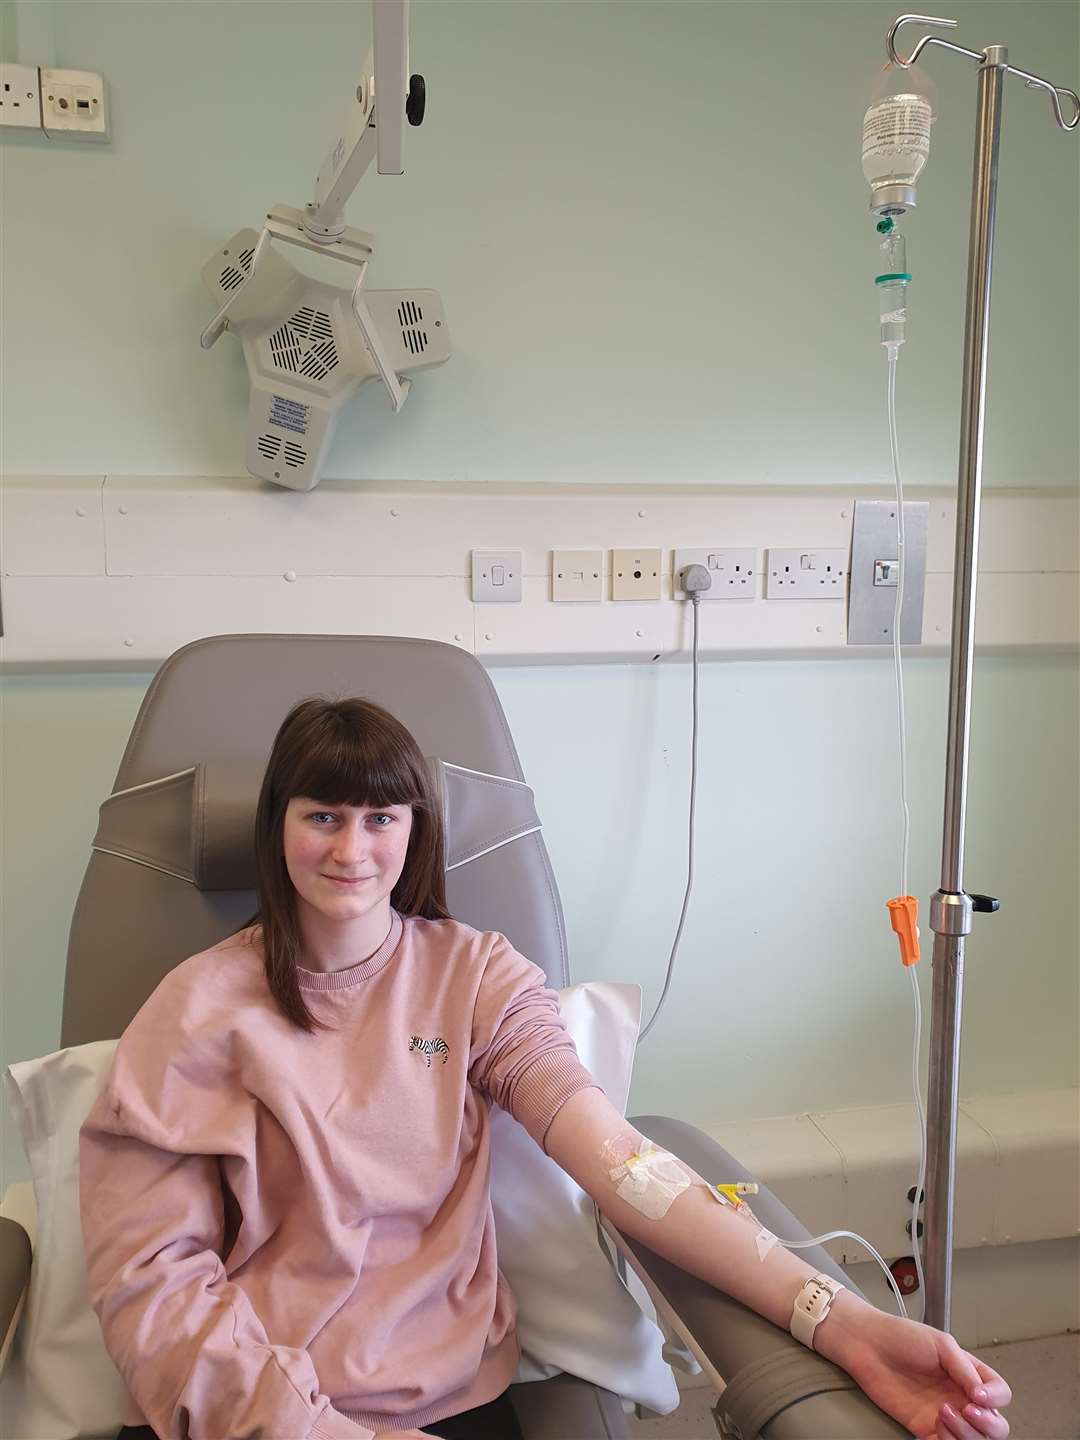 Natalie Beeton relies on immunoglobulin medicines to protect against serious illness due to her immunodeficiency (NHS Blood and Transplant/PA)